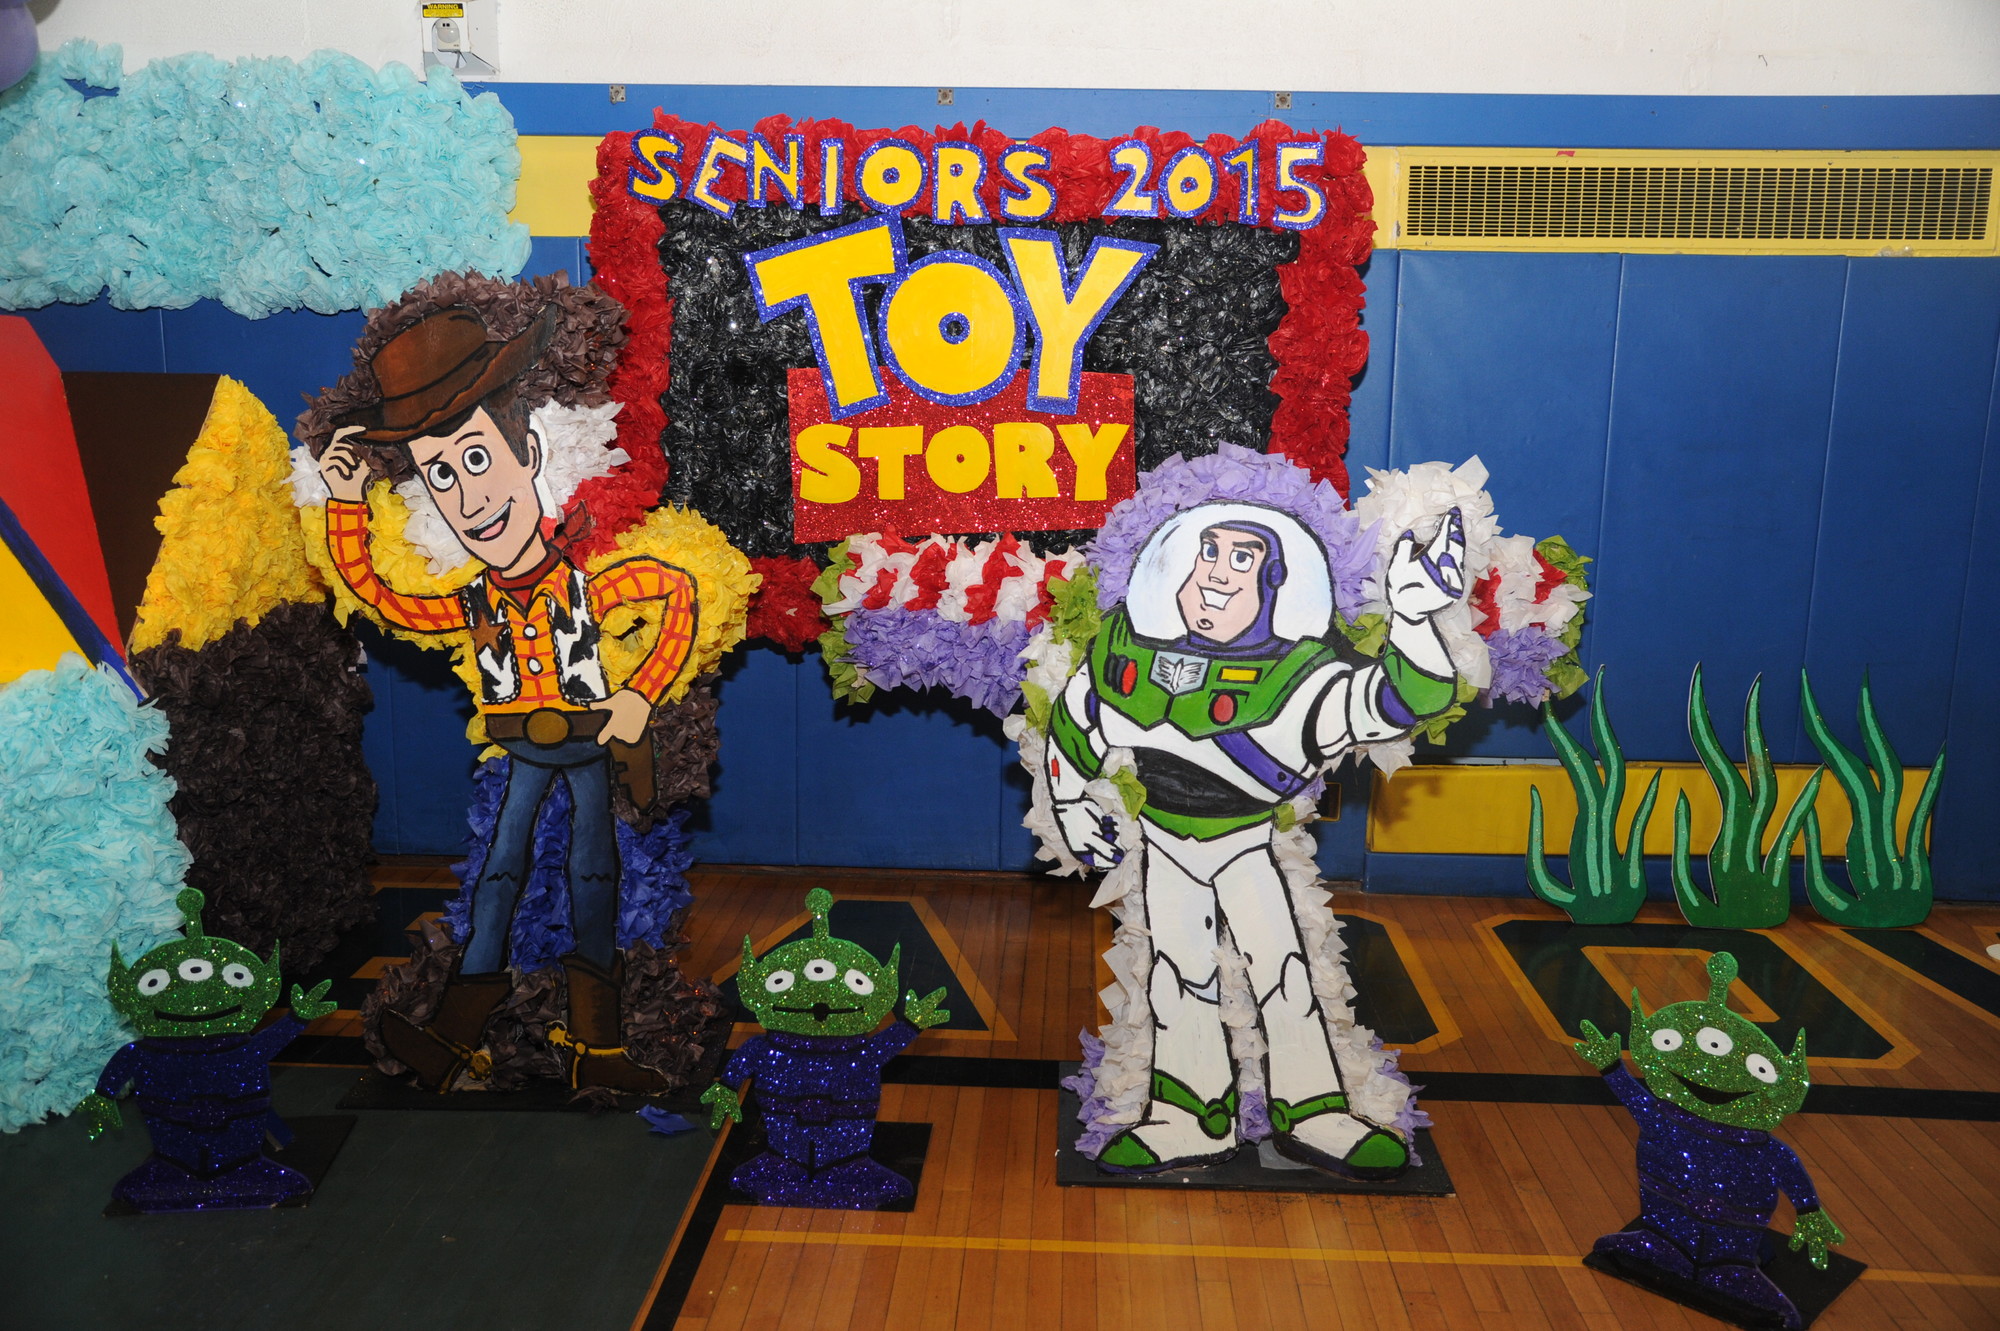 Students paid homage to Pixar movies, with seniors picking Toy Story.